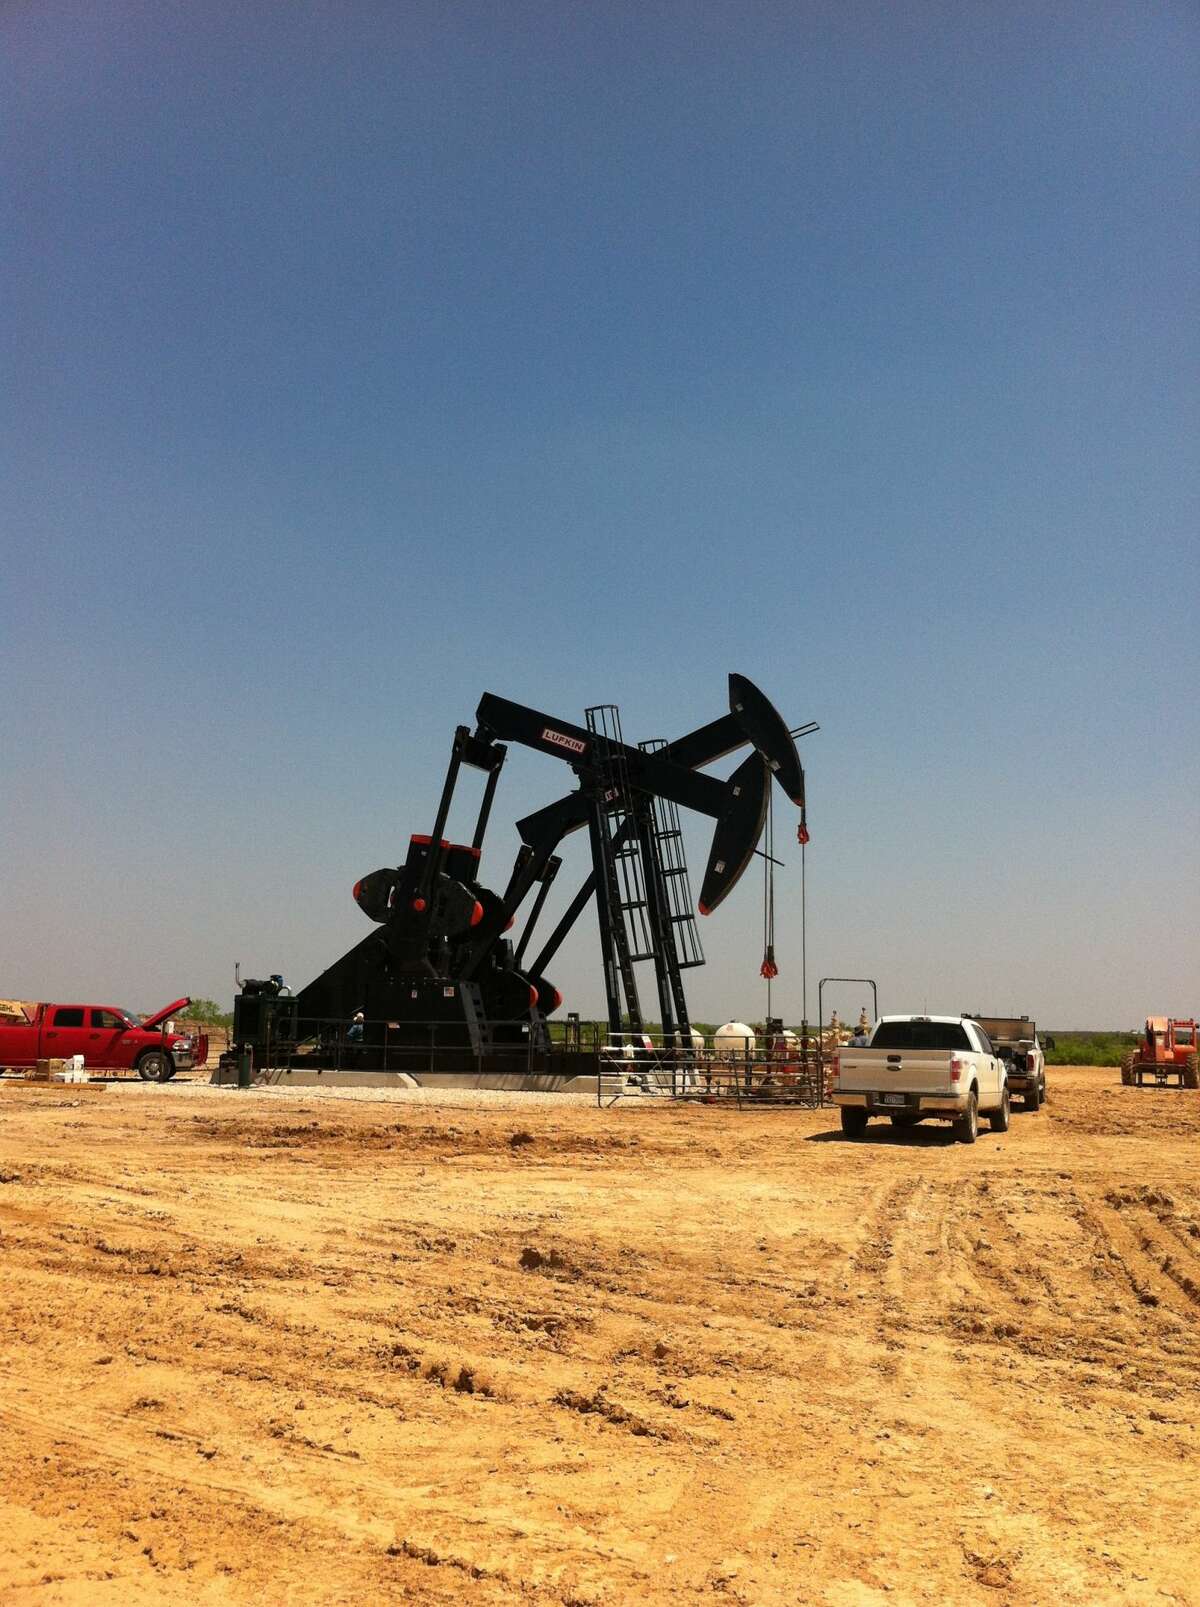 A Carrizo well is seen in La Salle County. Analysts see Callon Petroleum’s acquisition of Carrizo Oil & Gas as an indication that consolidation in the oil patch is happening at multiple levels. Carrizo brings Eagle Ford assets to the table, but some analysts think Callon may monetize those assets and return to its status as a pure Permian player.